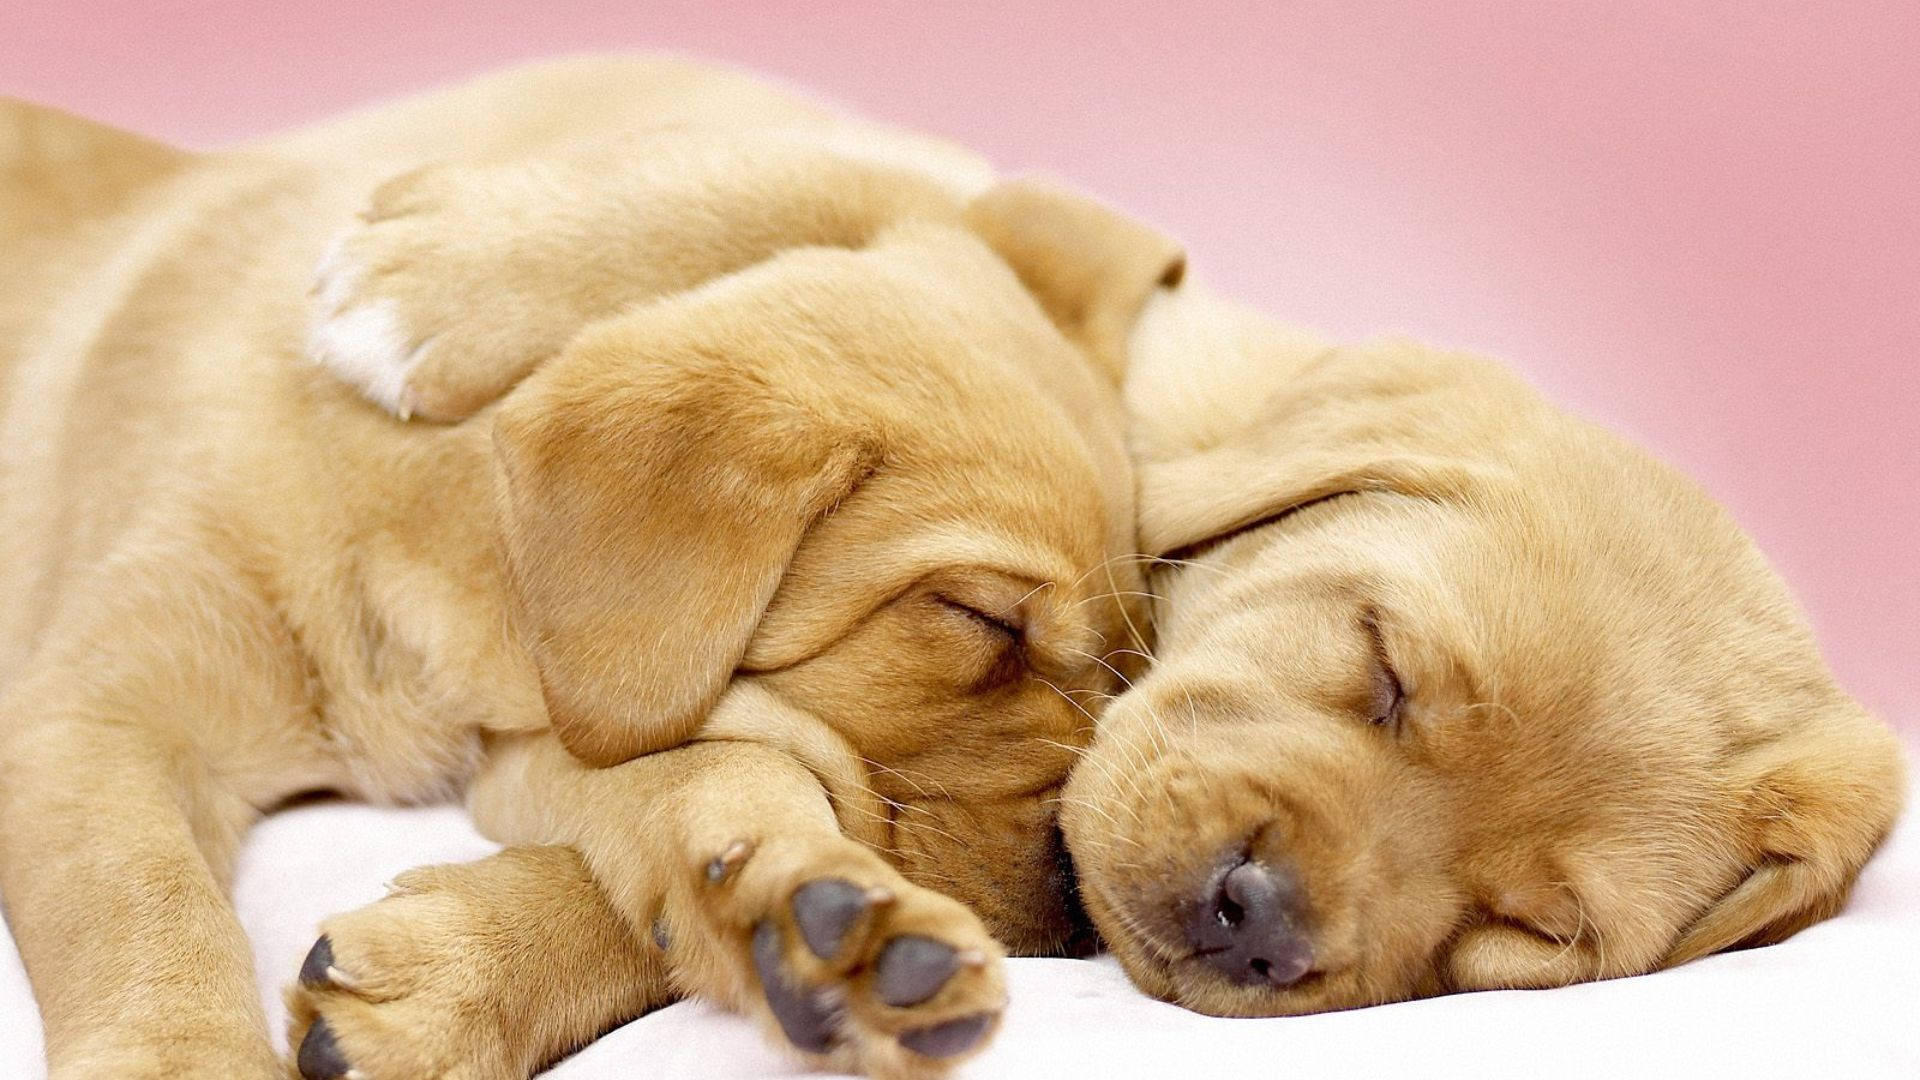 Resting Puppies Background